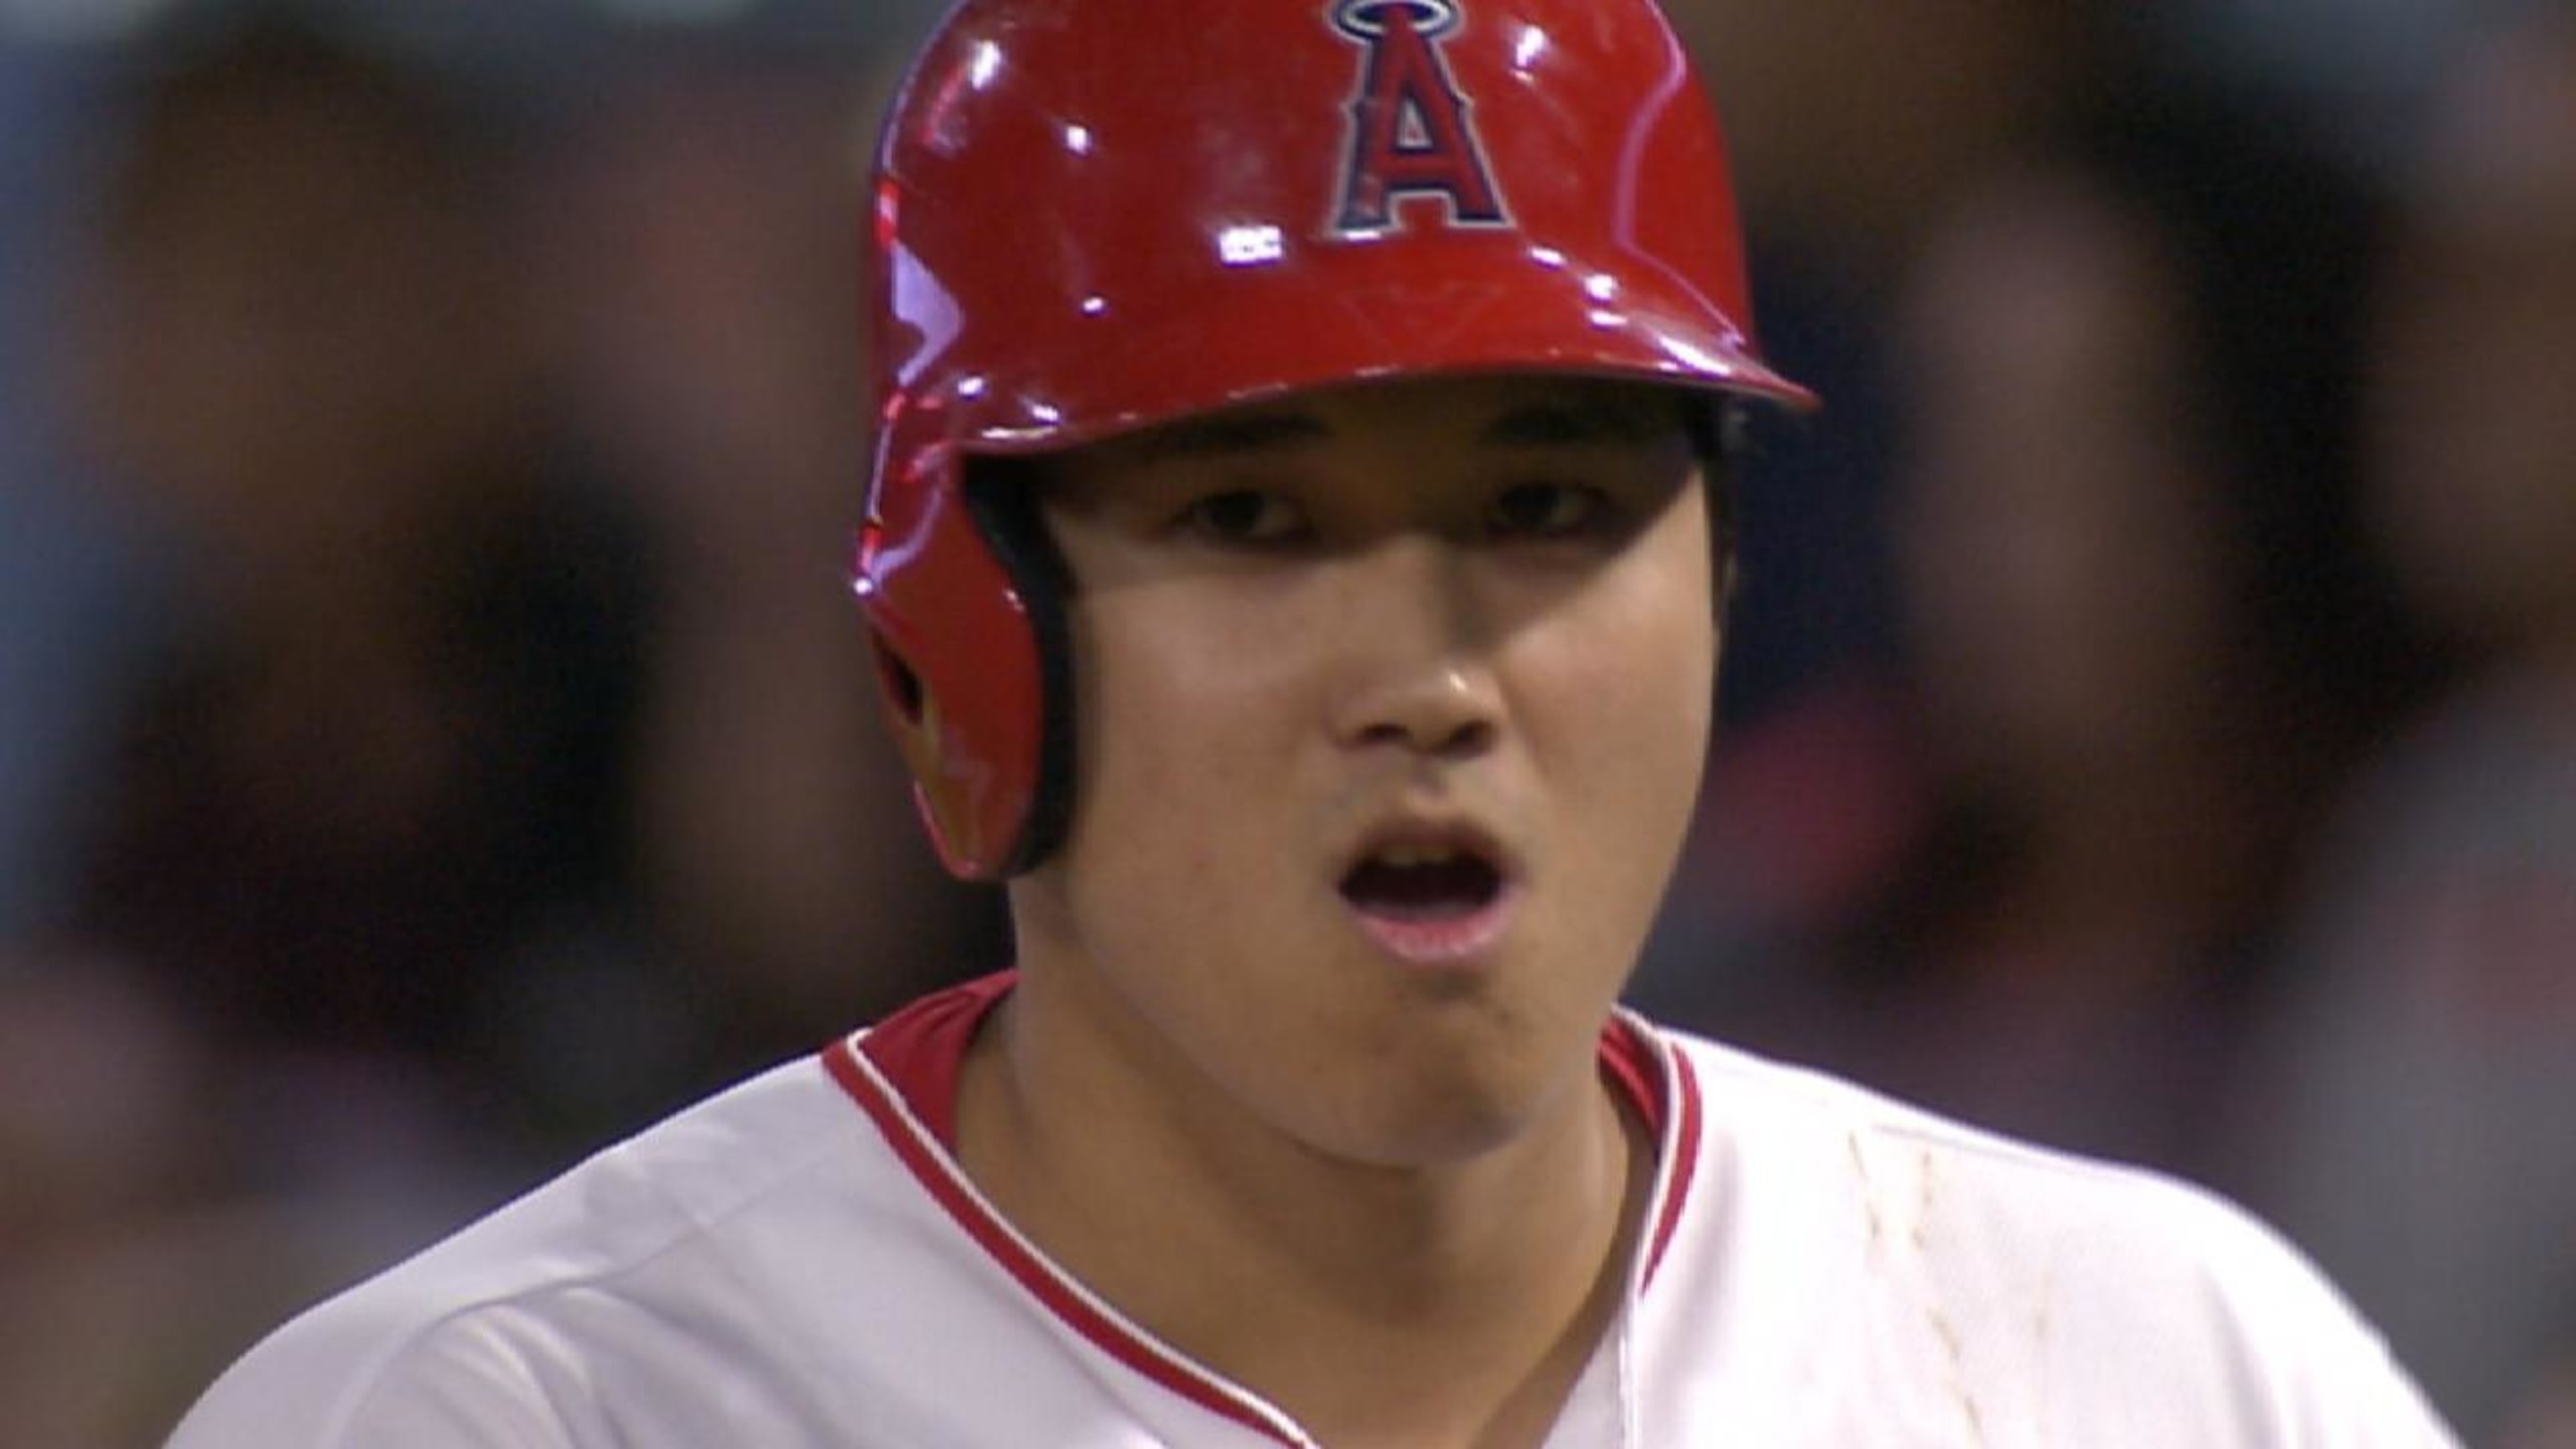 Ohtani's 3 RBIs Trout's HR leads Angels over Royals